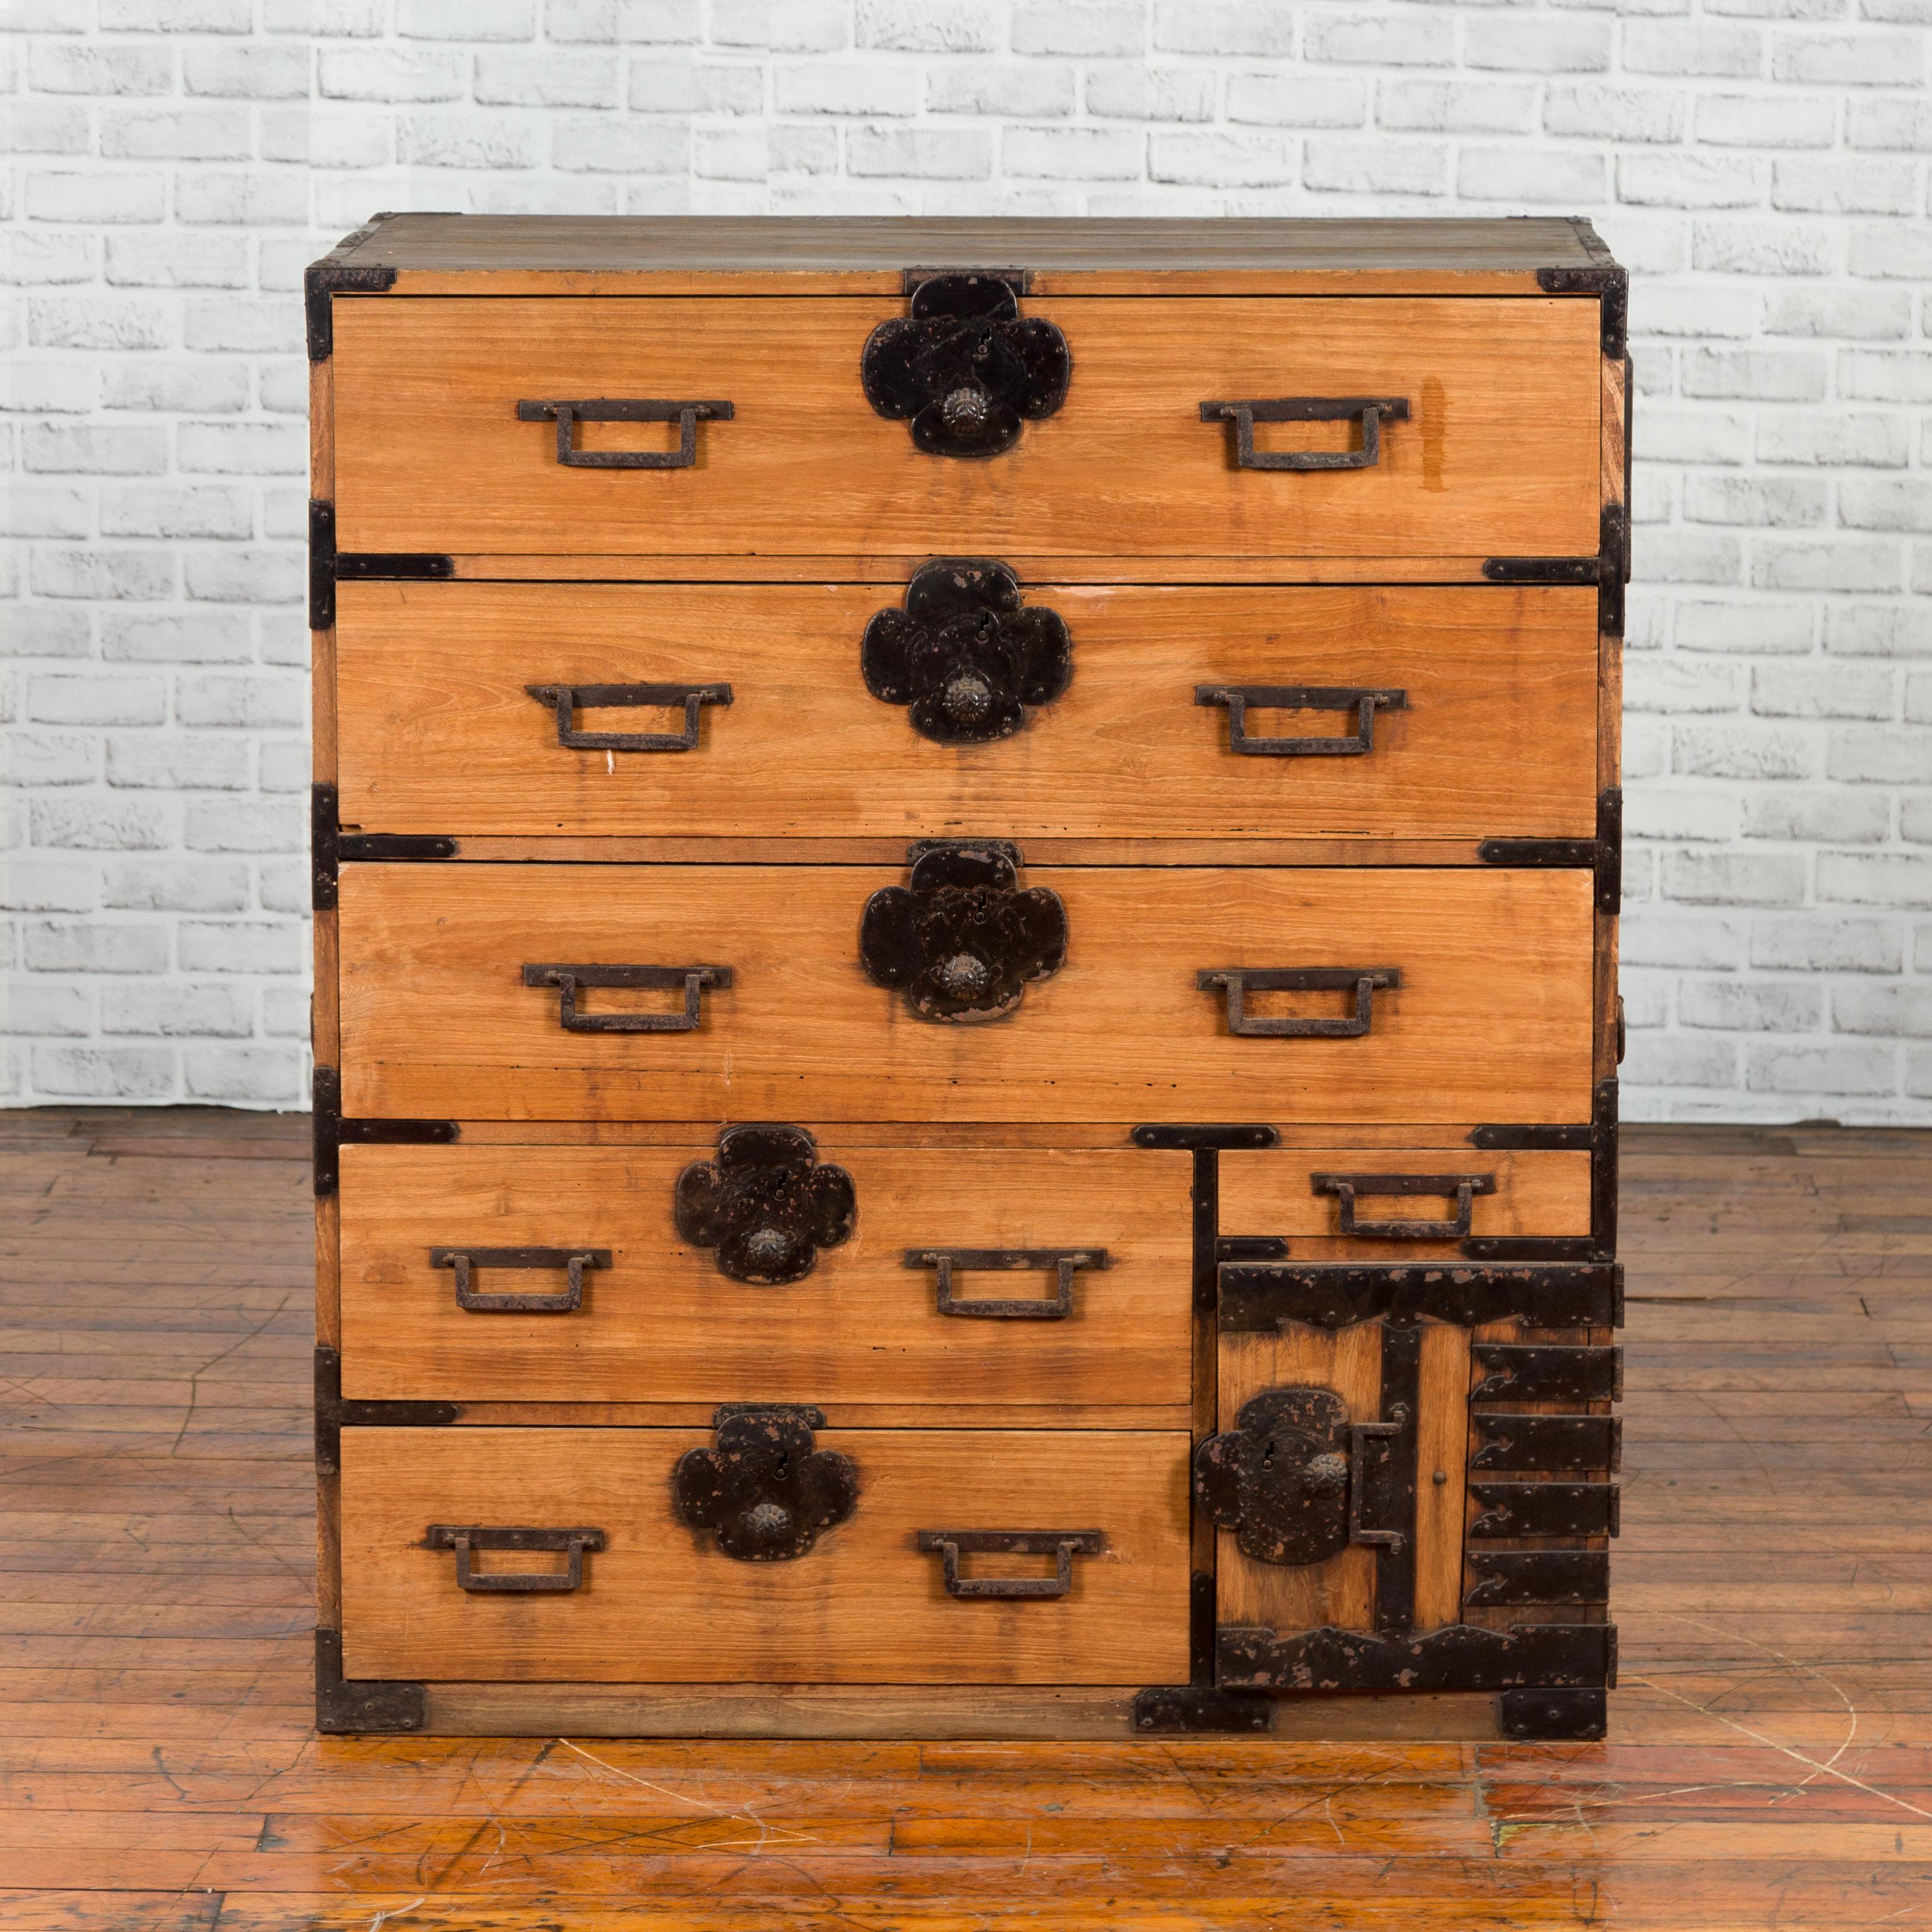 A Japanese Meiji period choba-dansu merchant's chest from the late 19th century, with five drawers and hidden safety box. Created in Japan during the 19th century, this Choba-Dansu chest, made for a travelling merchant, features a natural patina